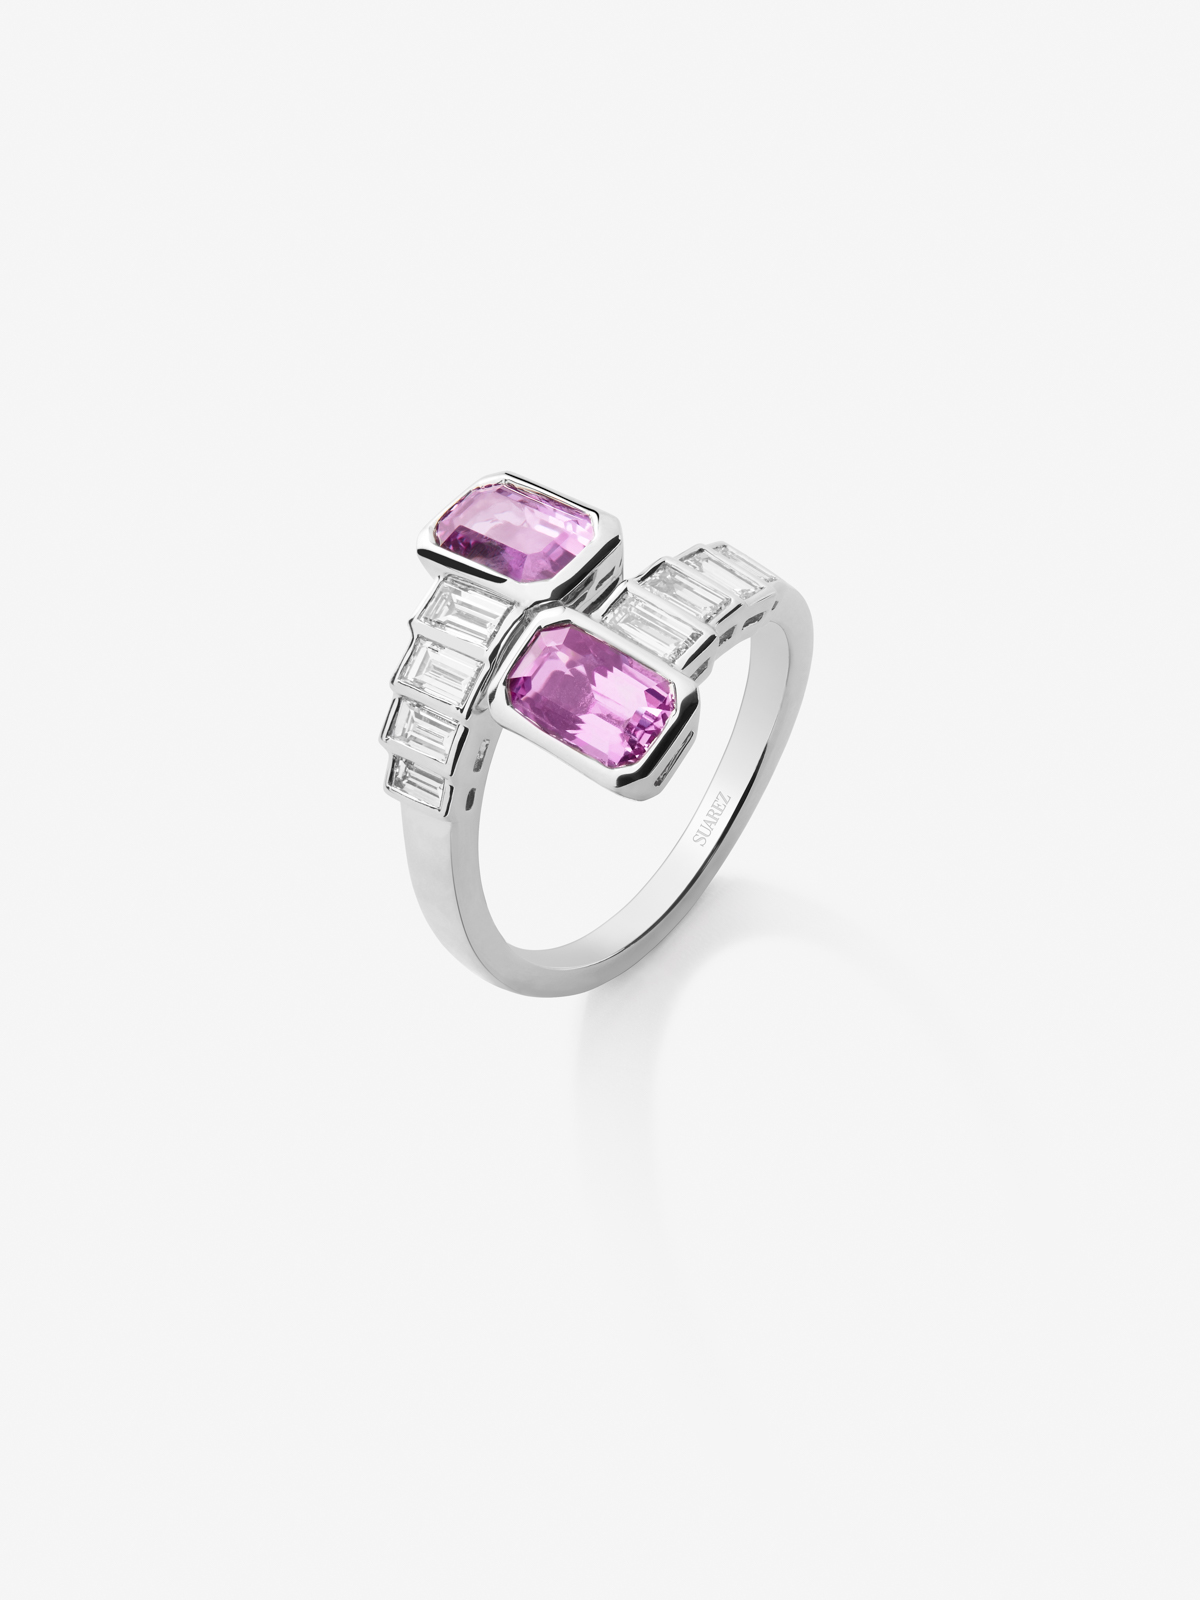 You and I 18k White Gold Ring with Rosas Sapphires in octagonal 2,28 cts and white diamonds in 0.57 CTS baggos